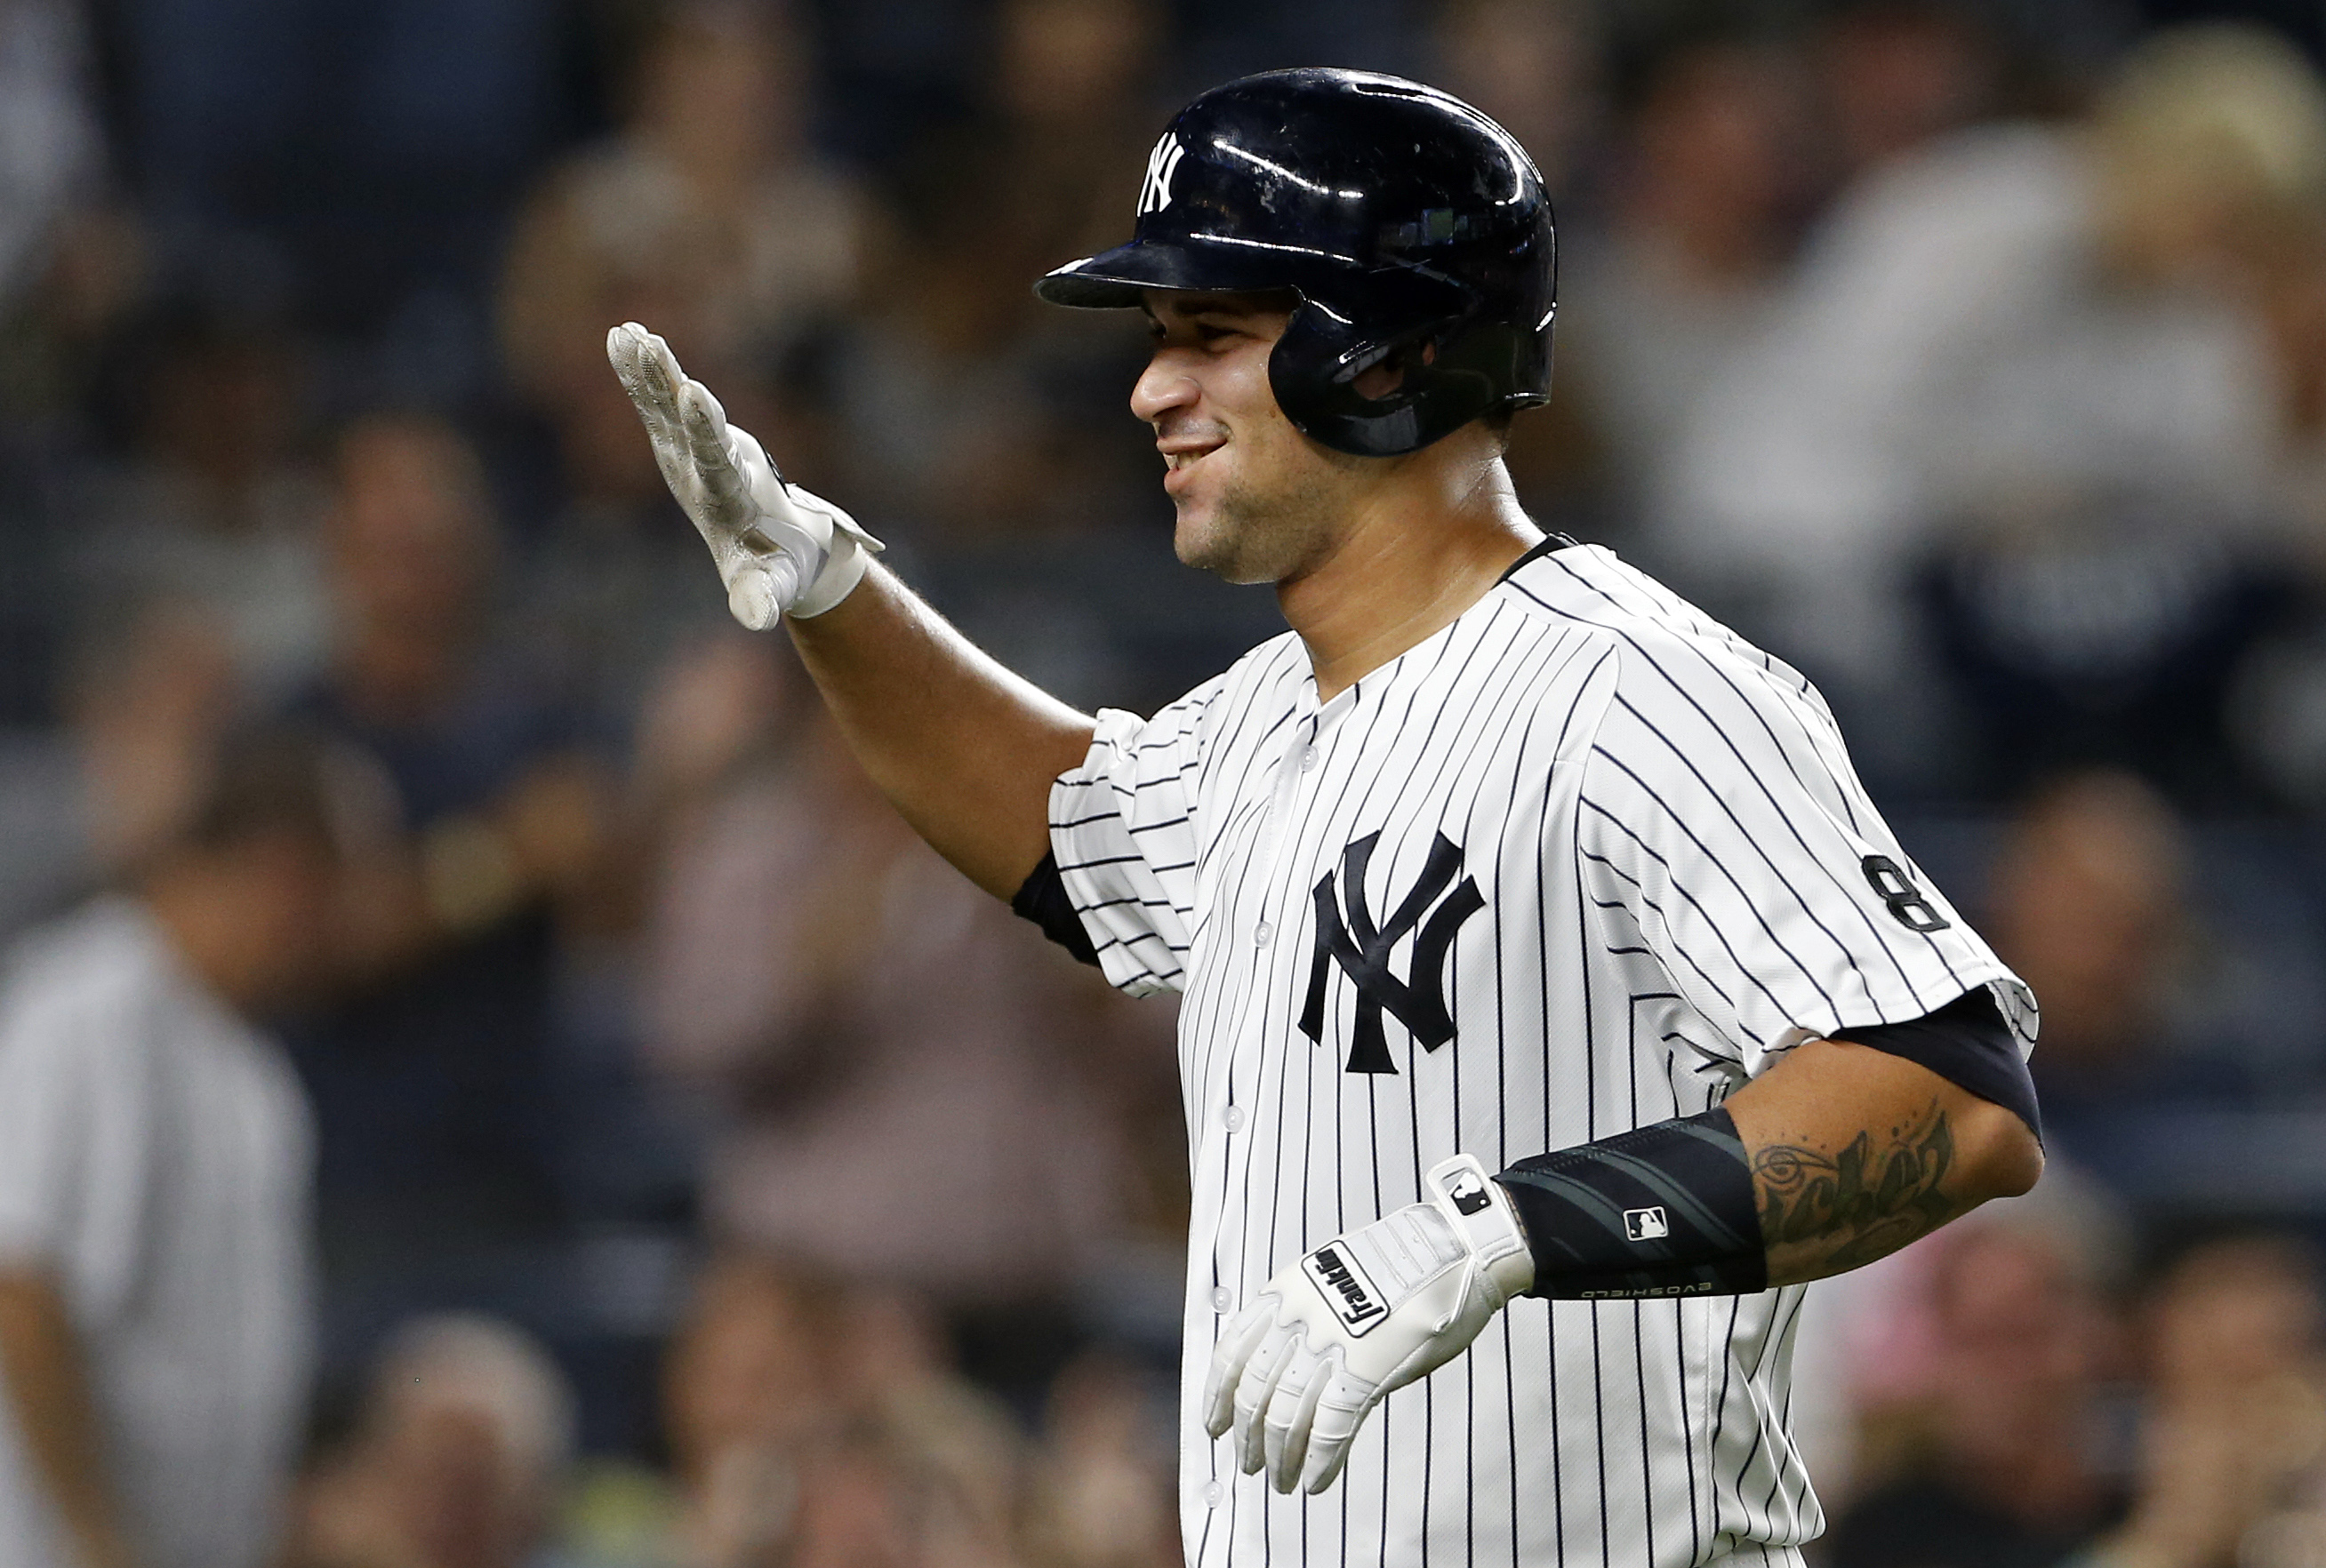 New York Yankees: Gary Sanchez Announces Collaboration With Routine Baseball 2